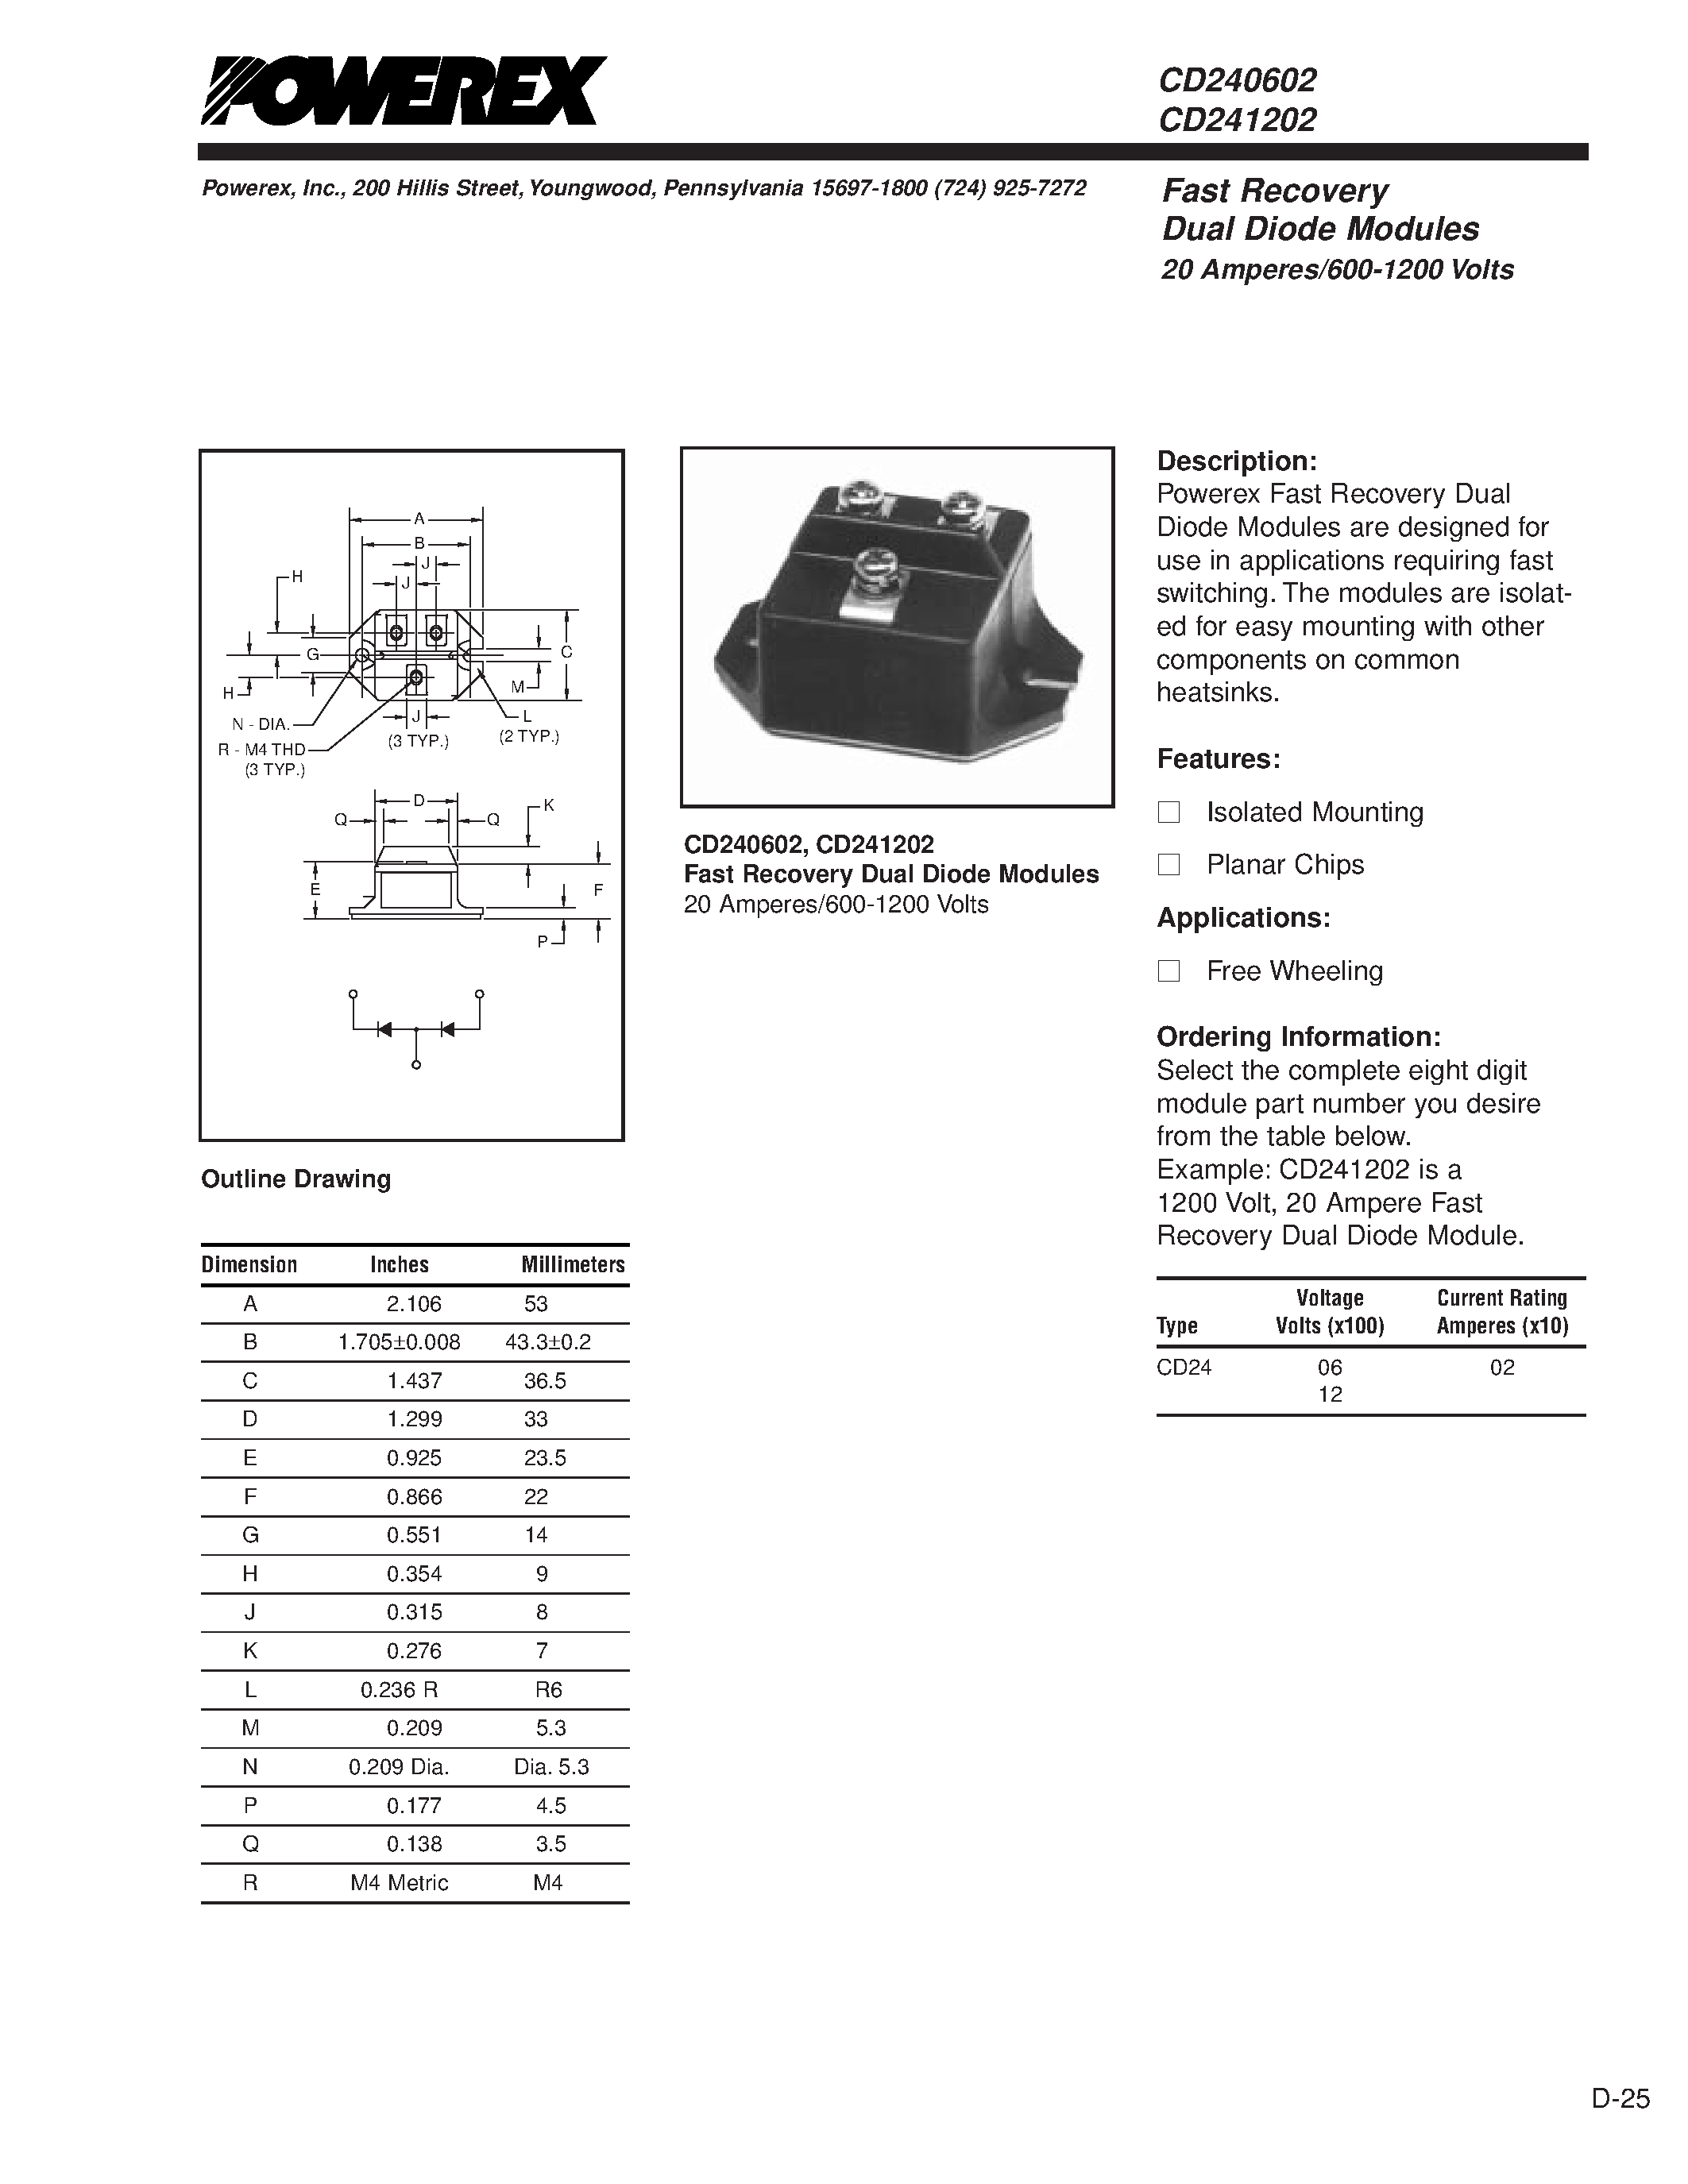 Datasheet CD241202 - Fast Recovery Dual Diode Modules 20 Amperes/600-1200 Volts page 1